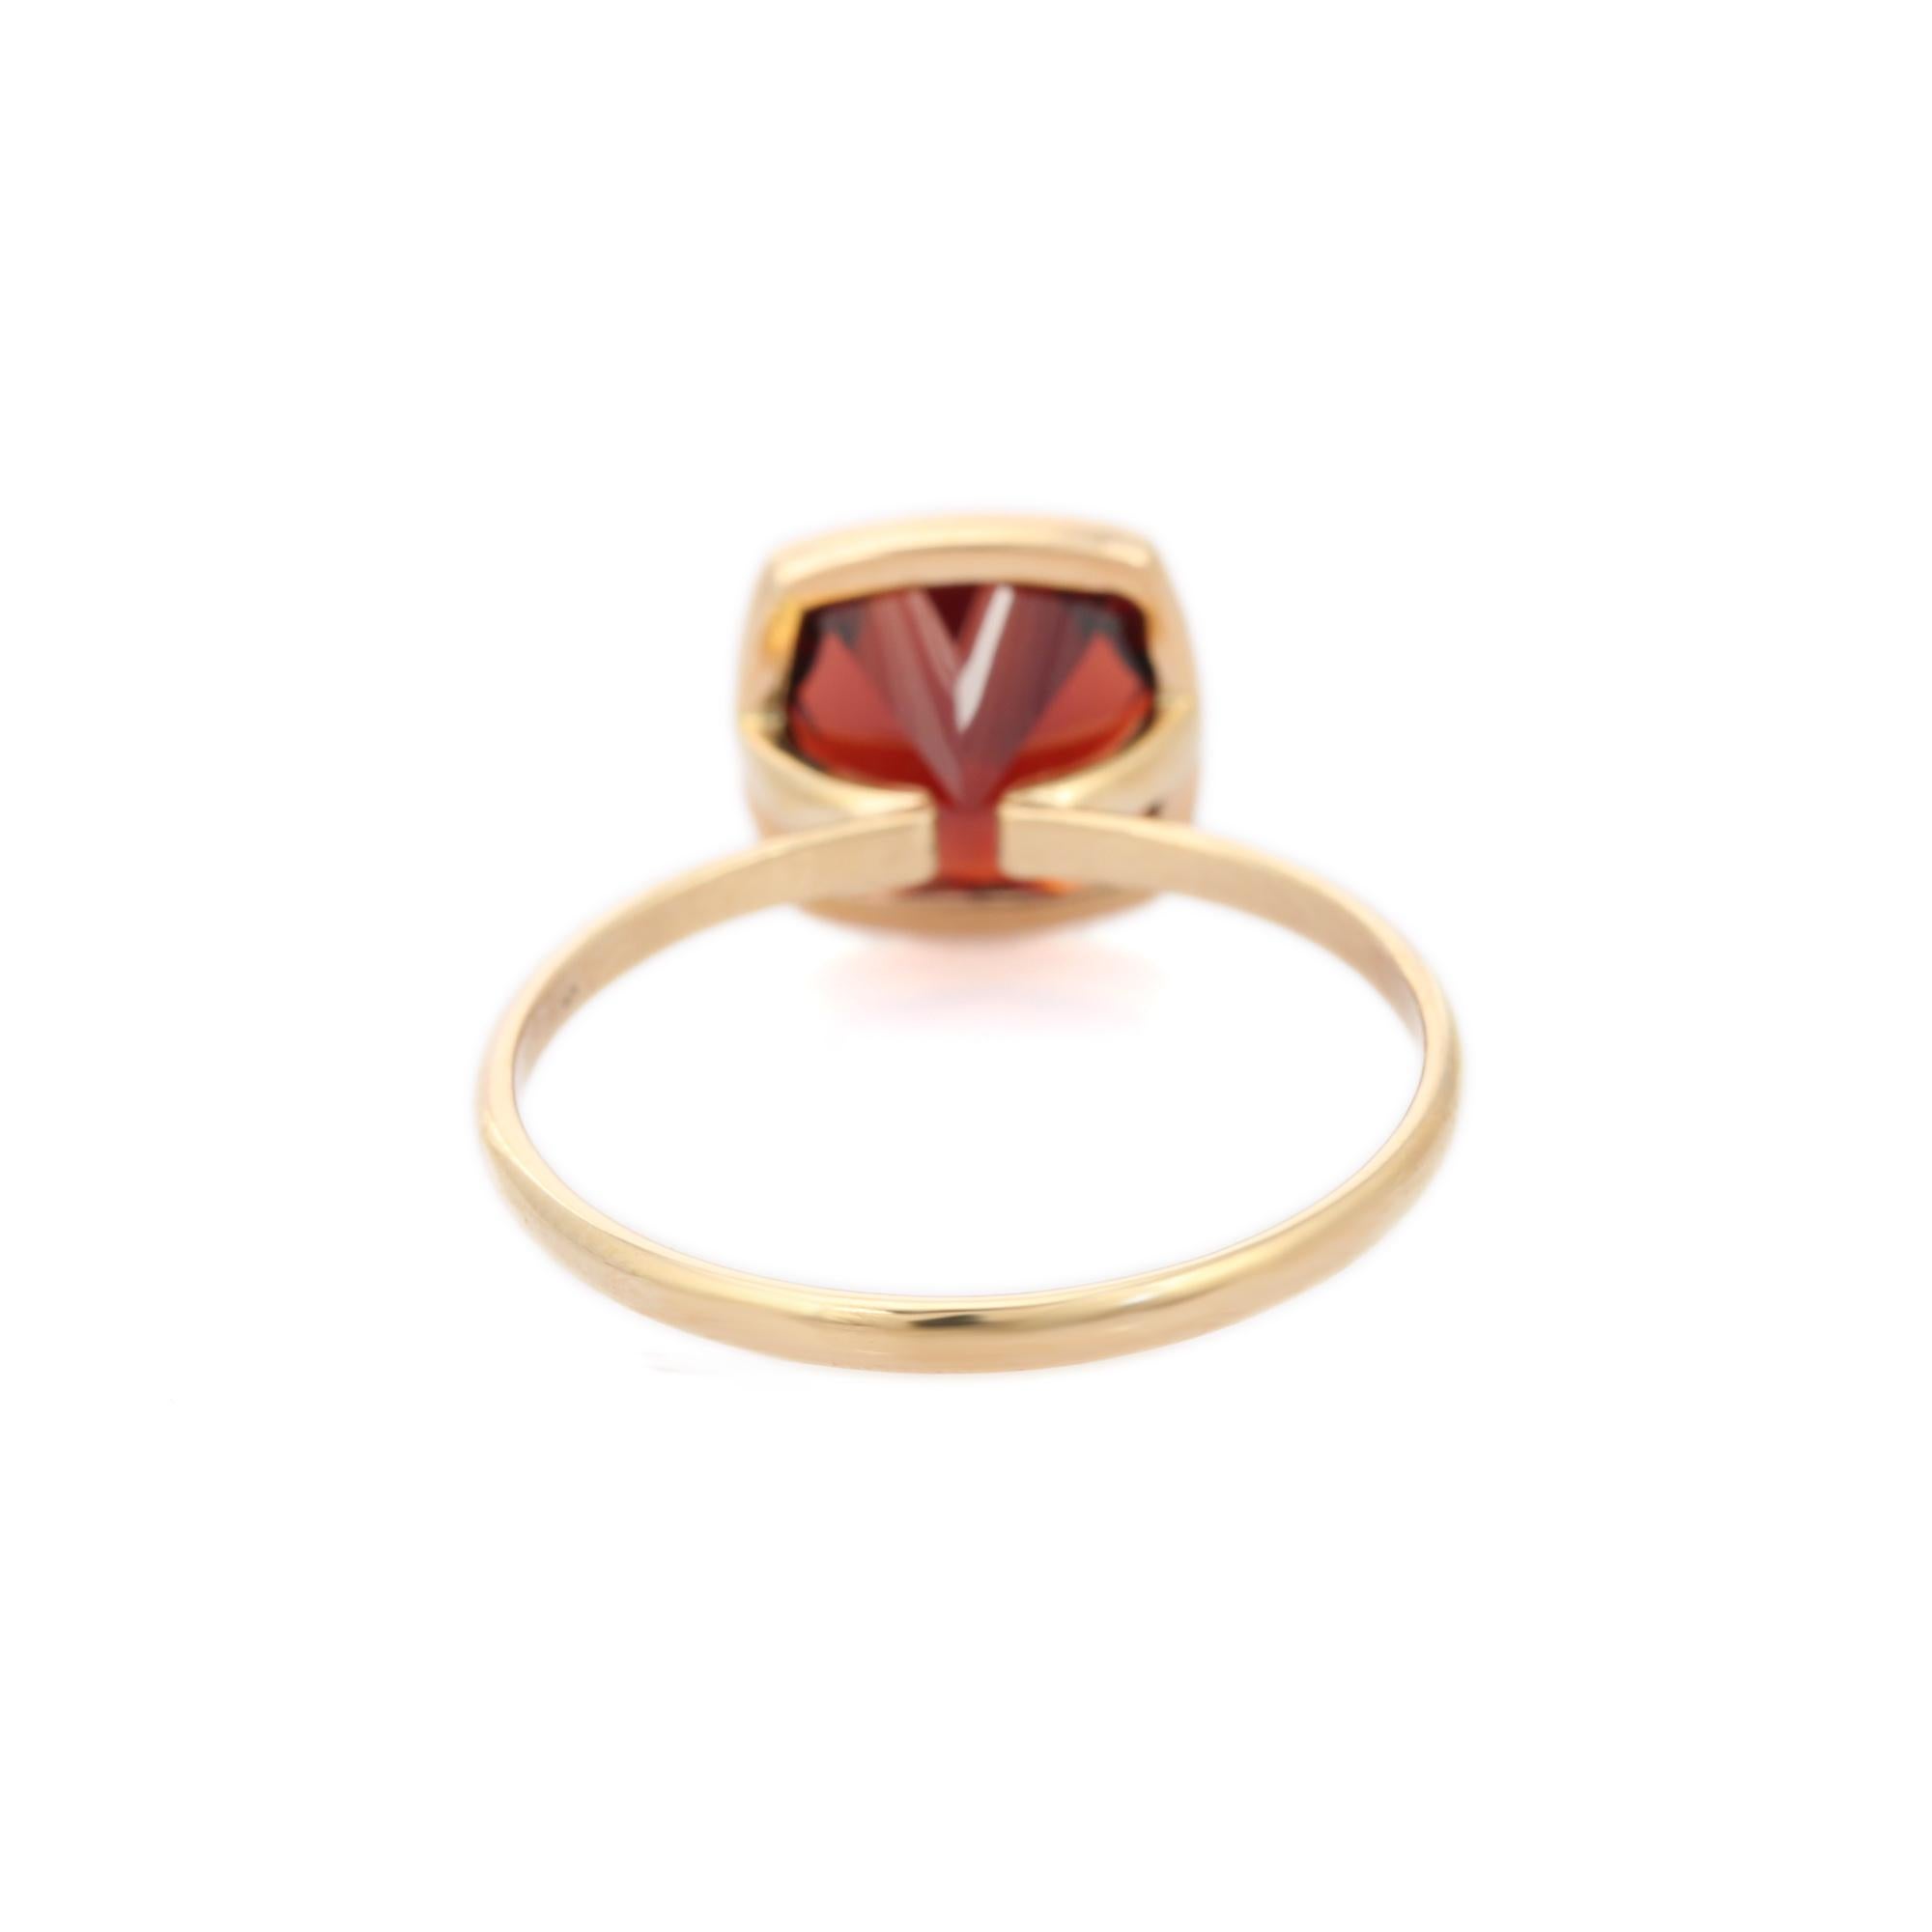 For Sale:  2.85 Carat Garnet Solitaire Ring in 14K Yellow Gold 3